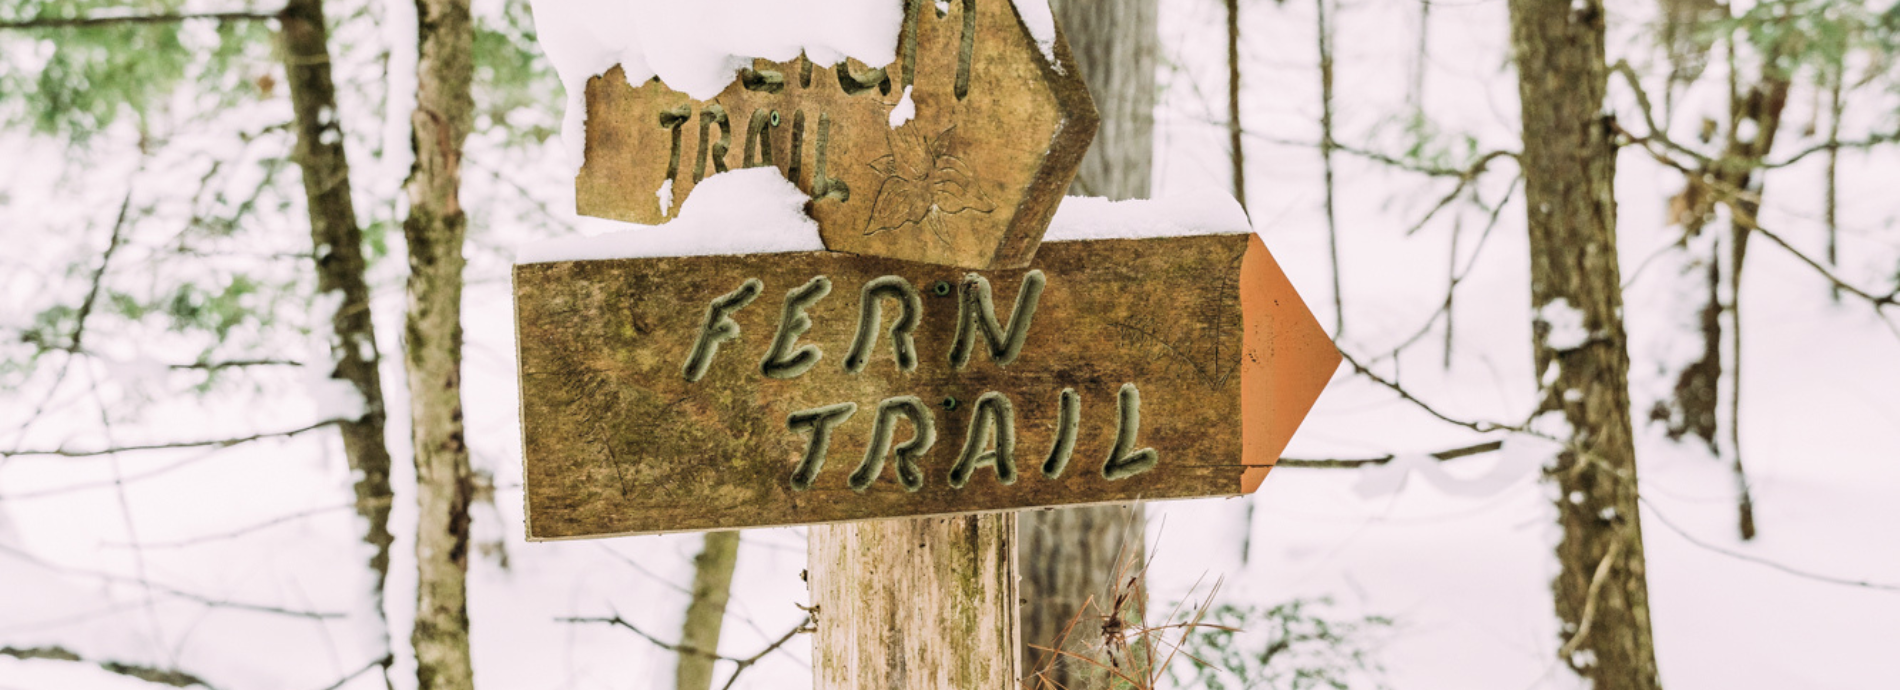 trail signs at Grants Woods in Severn